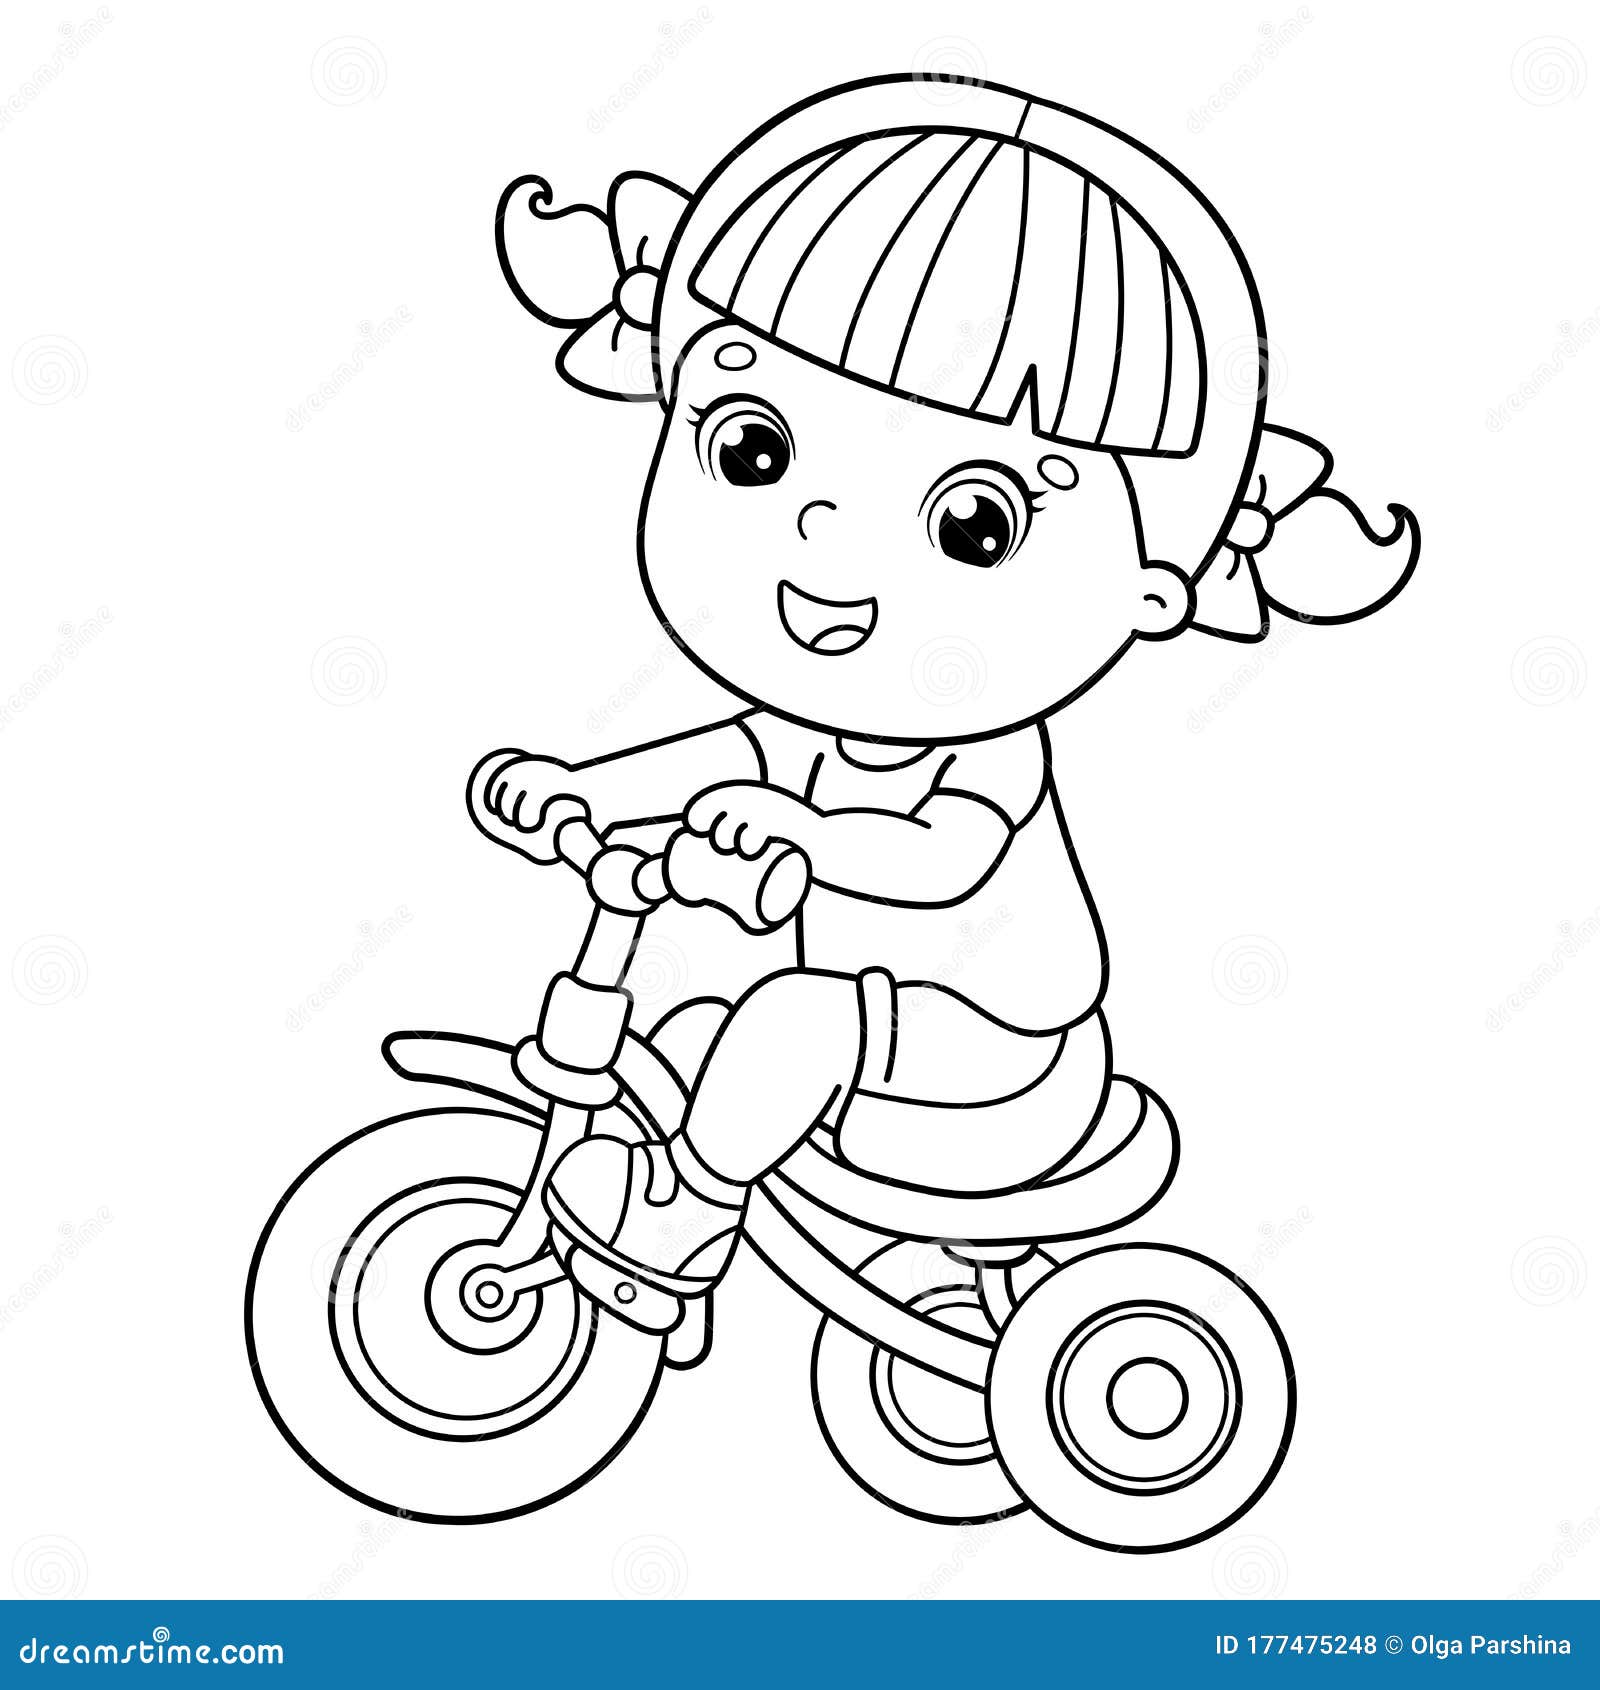 Coloring Page Outline of a Cartoon Girl Riding a Bicycle or Bike